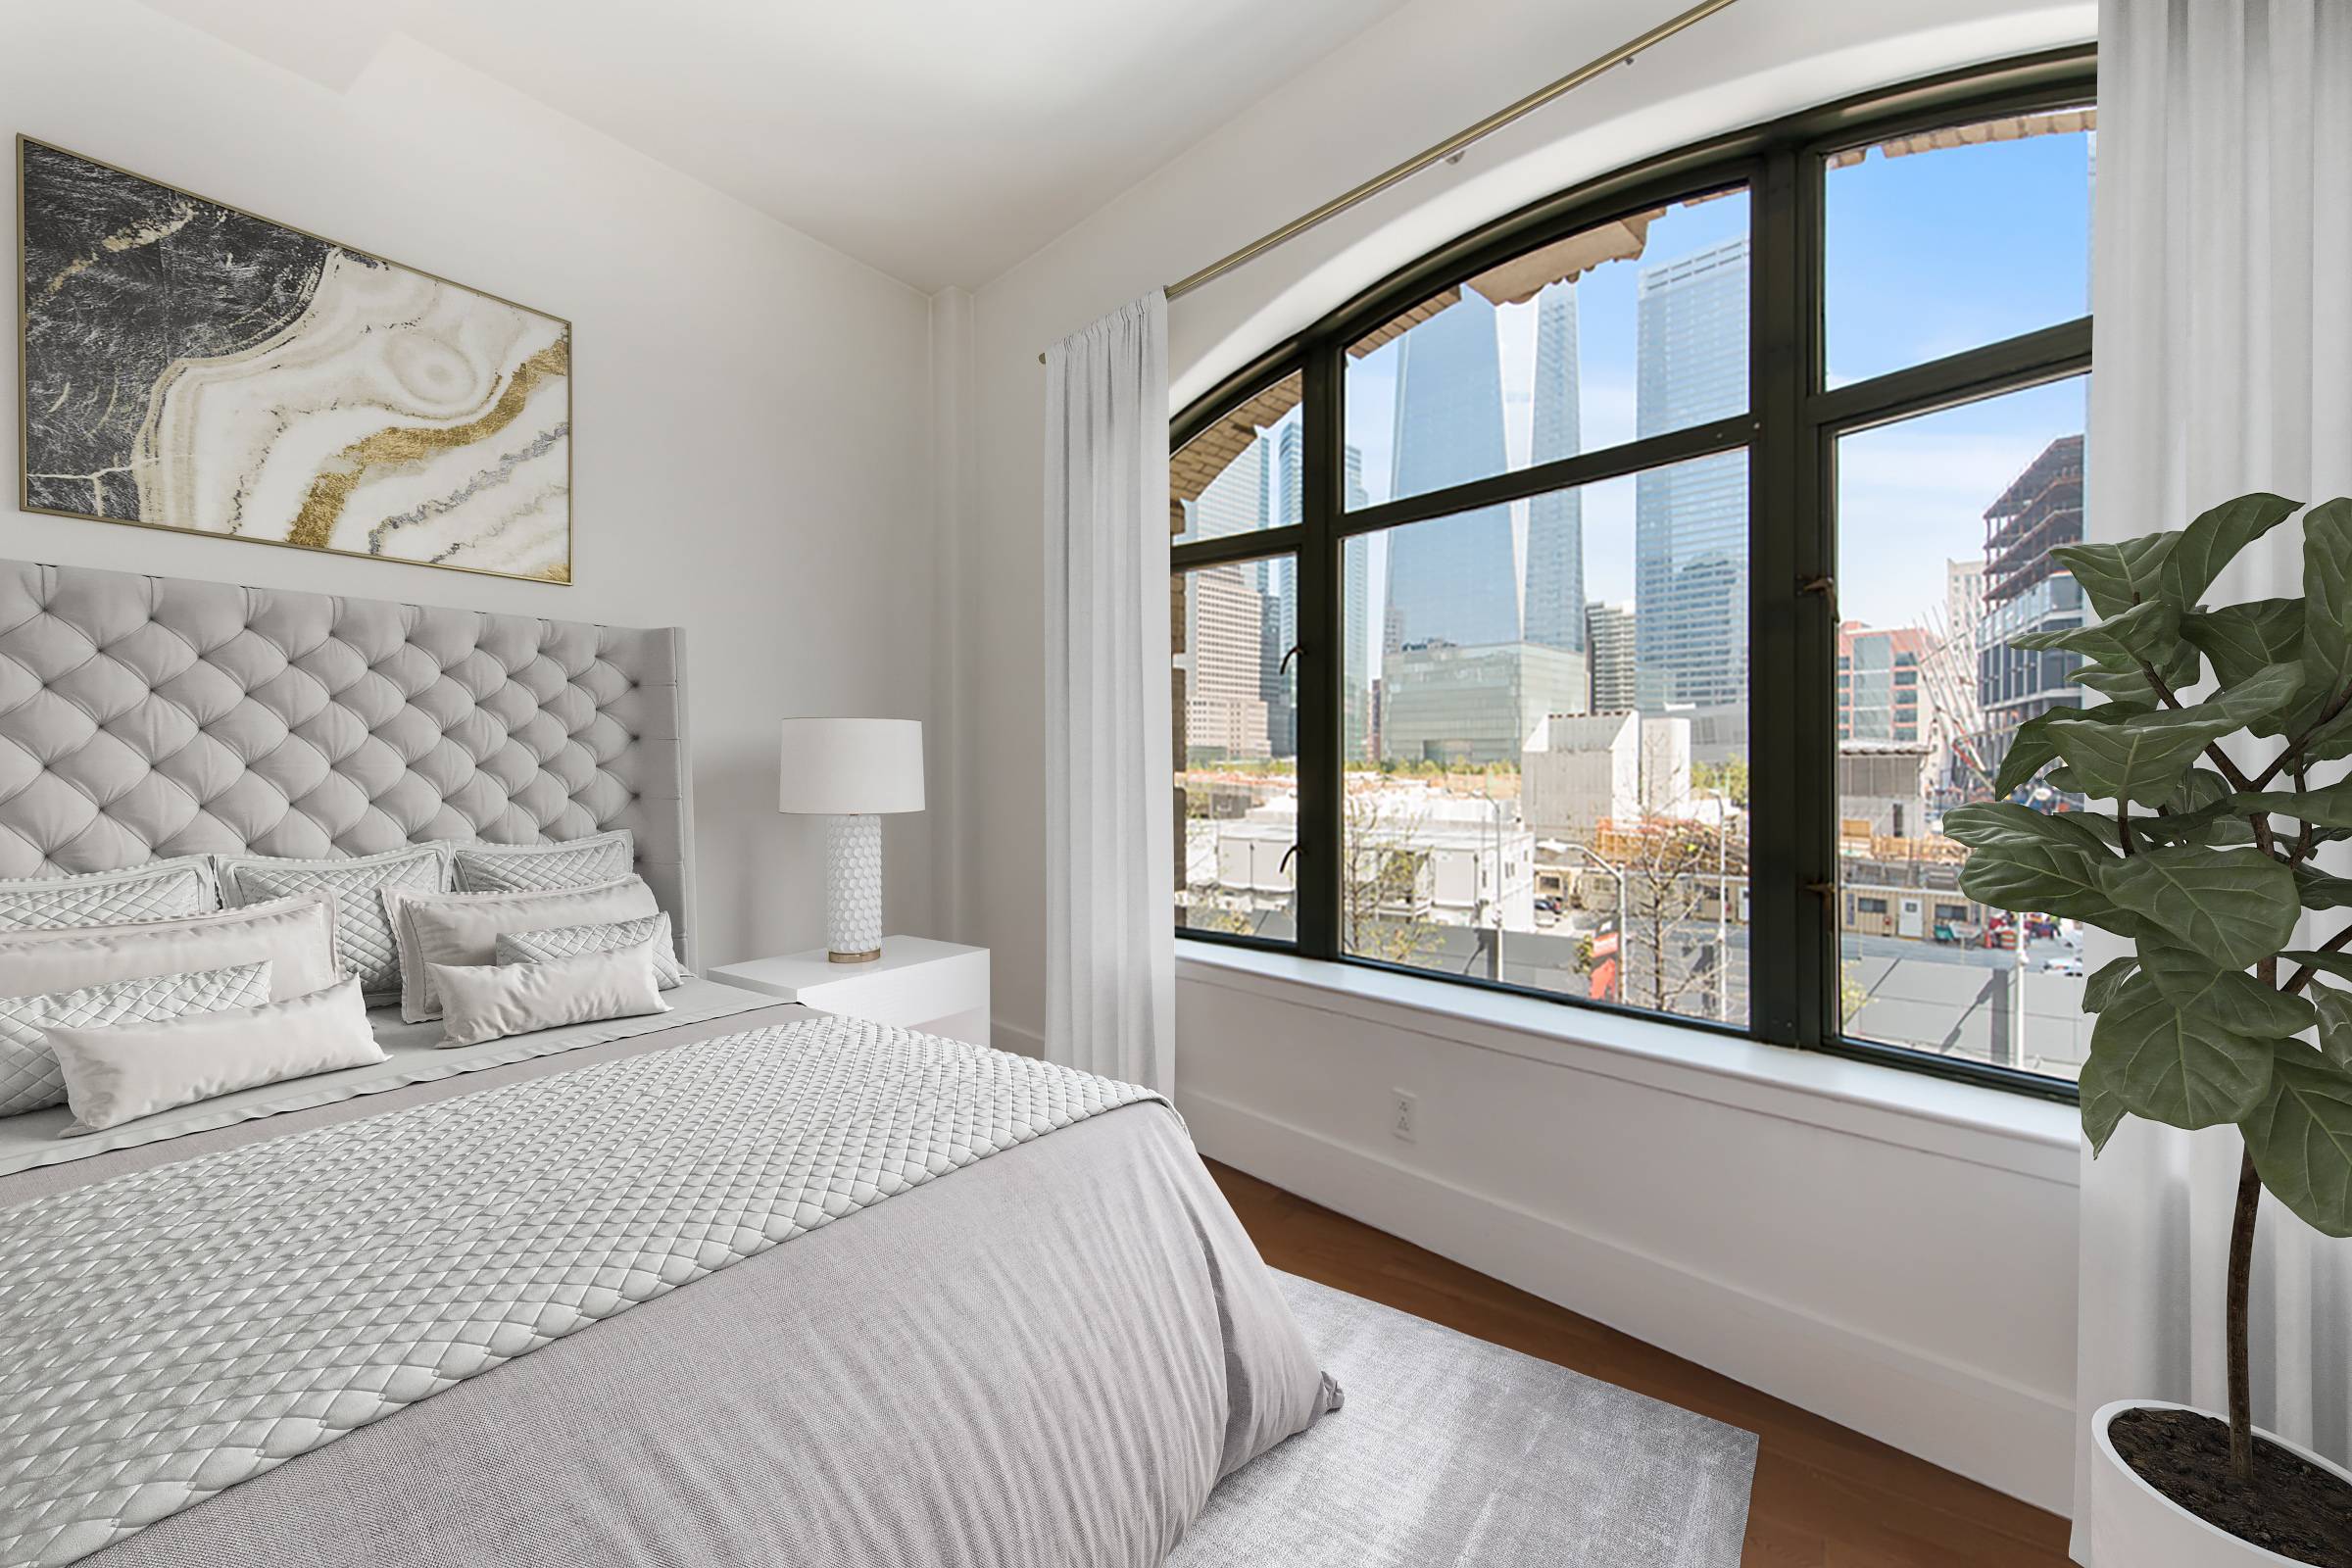 This beautiful one bedroom home features enormous arched windows, 10 and a half foot ceilings, and spectacular views of the Freedom Tower !